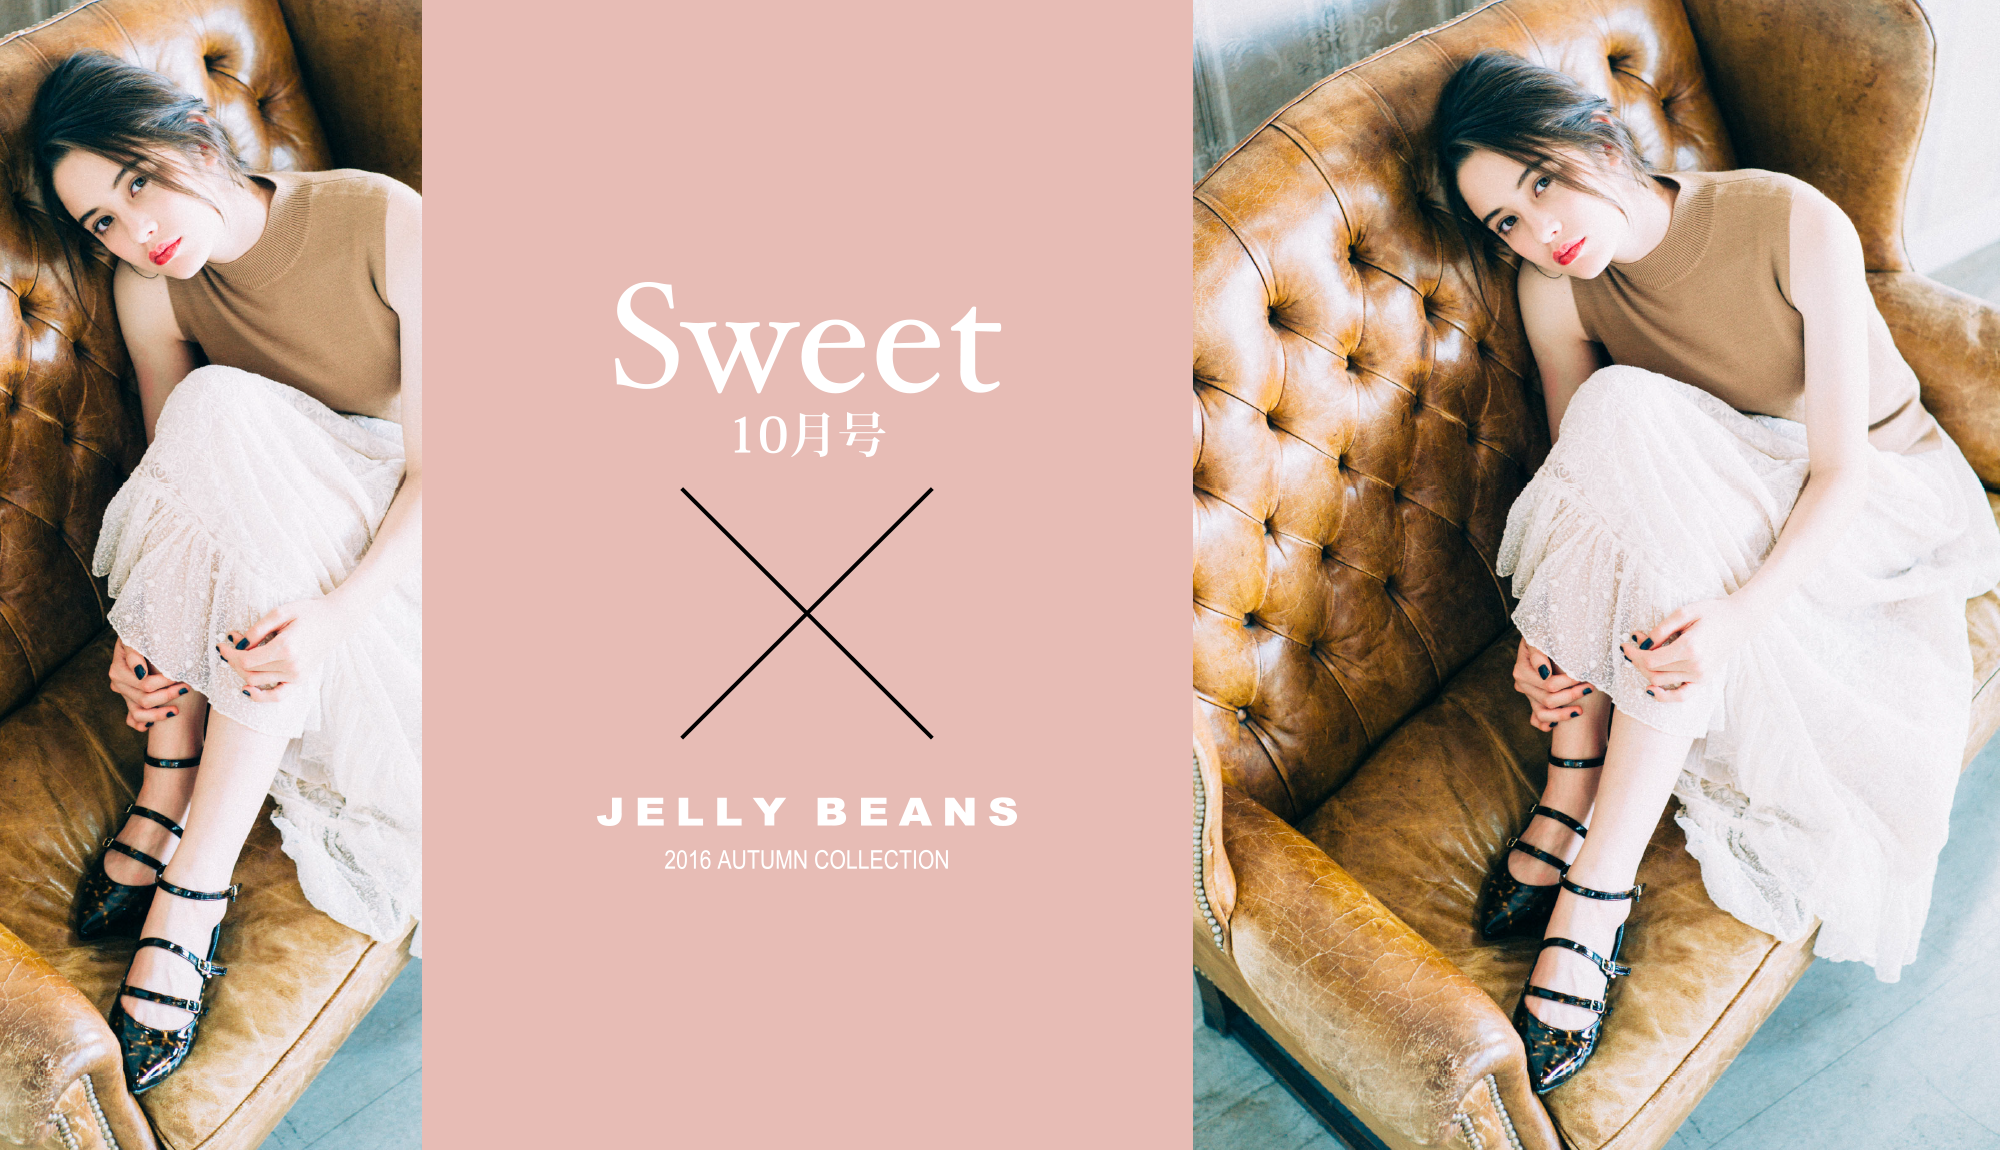 Sweet 10 x JELLY BEANS 2016 AUTUMN COLLECTION